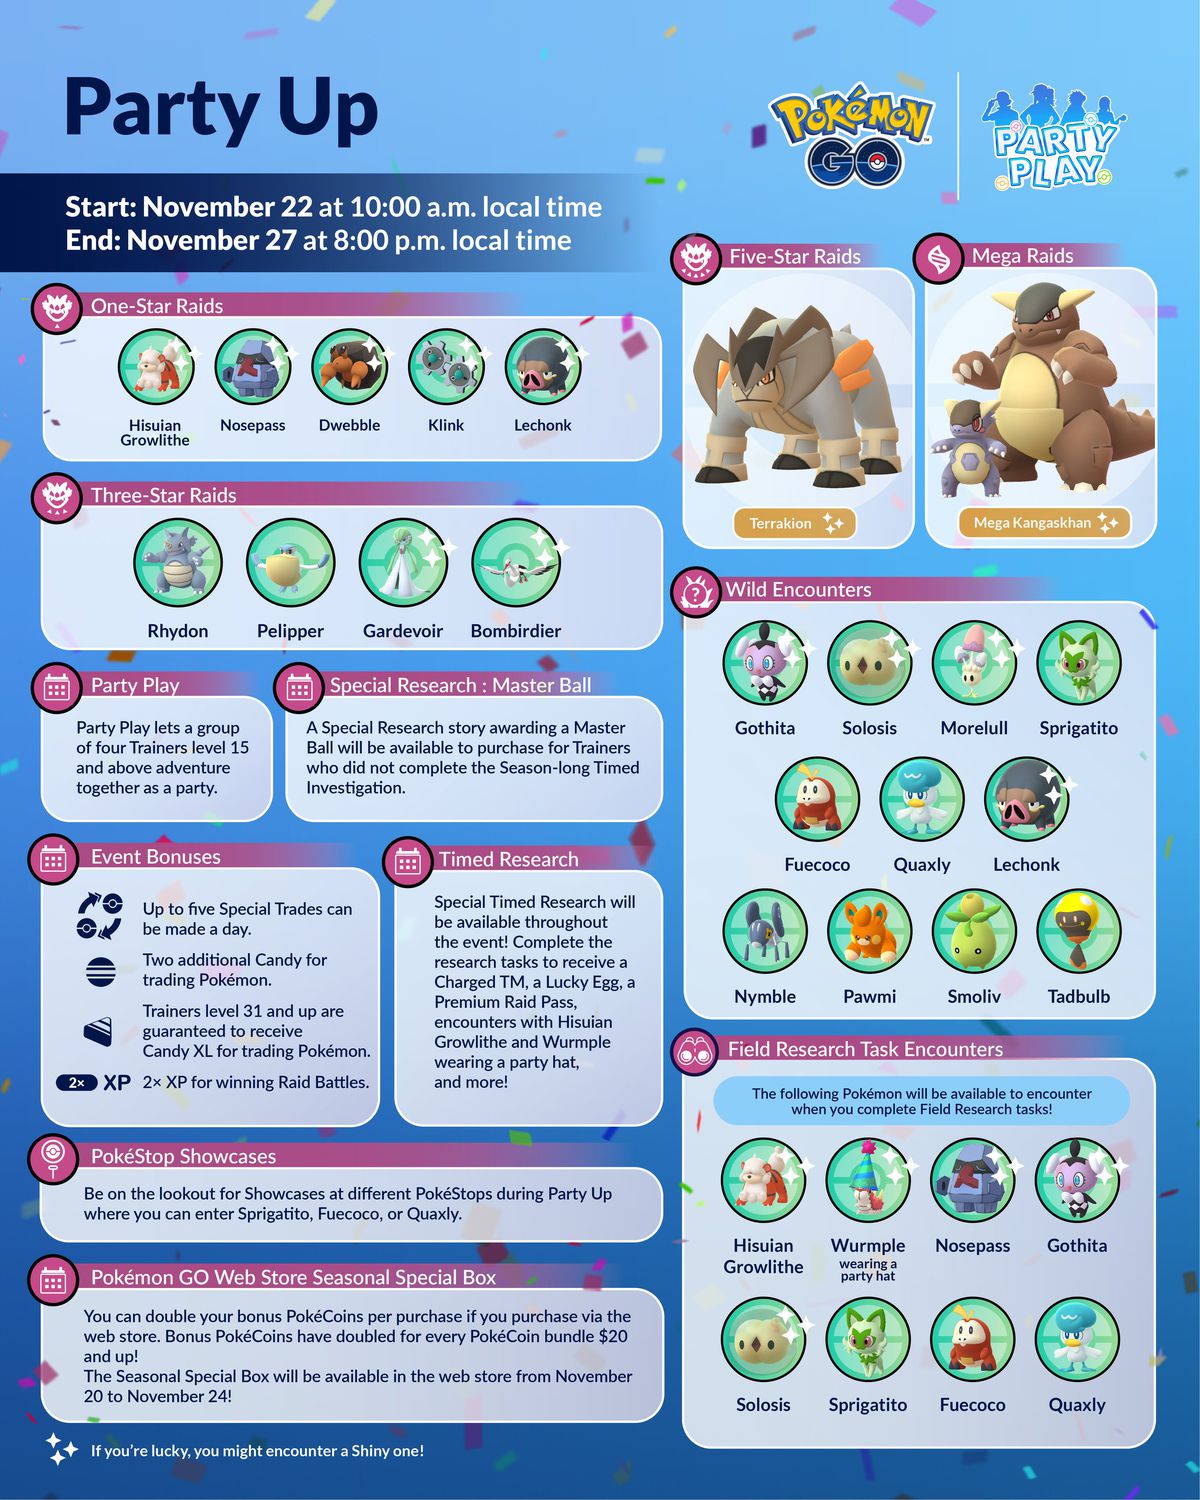 An infographic for the Pokémon Go “Party Up” event that shows all of the obtainable Pokémon.